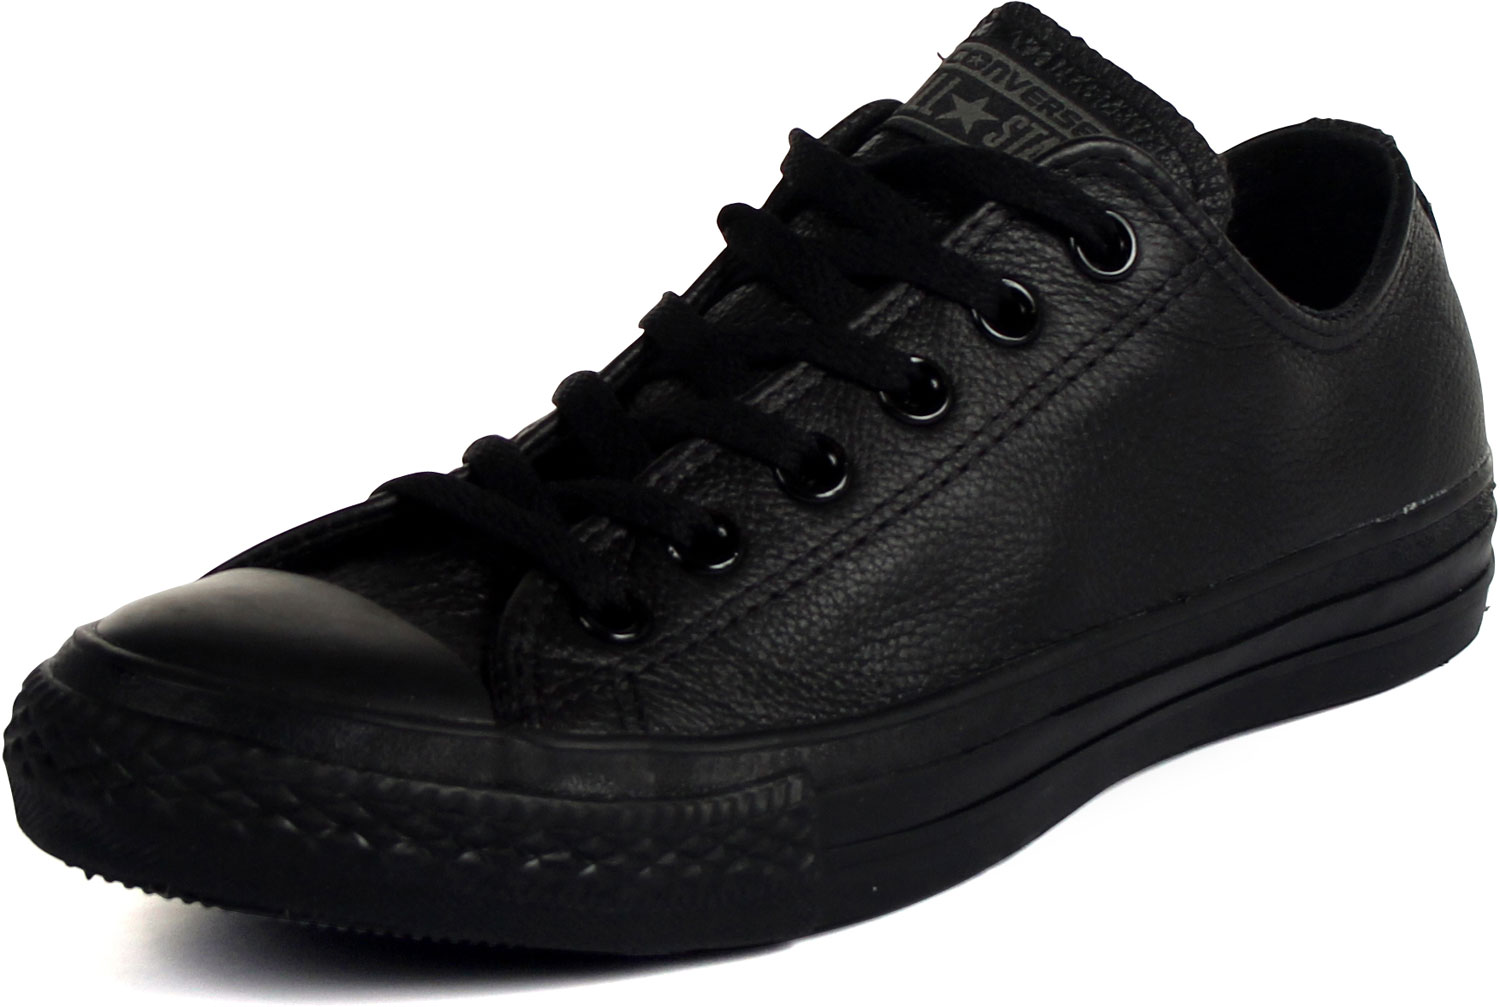 Converse Leather Chuck Taylor All Star Shoes (1T865) Low Top in Black Monochrome